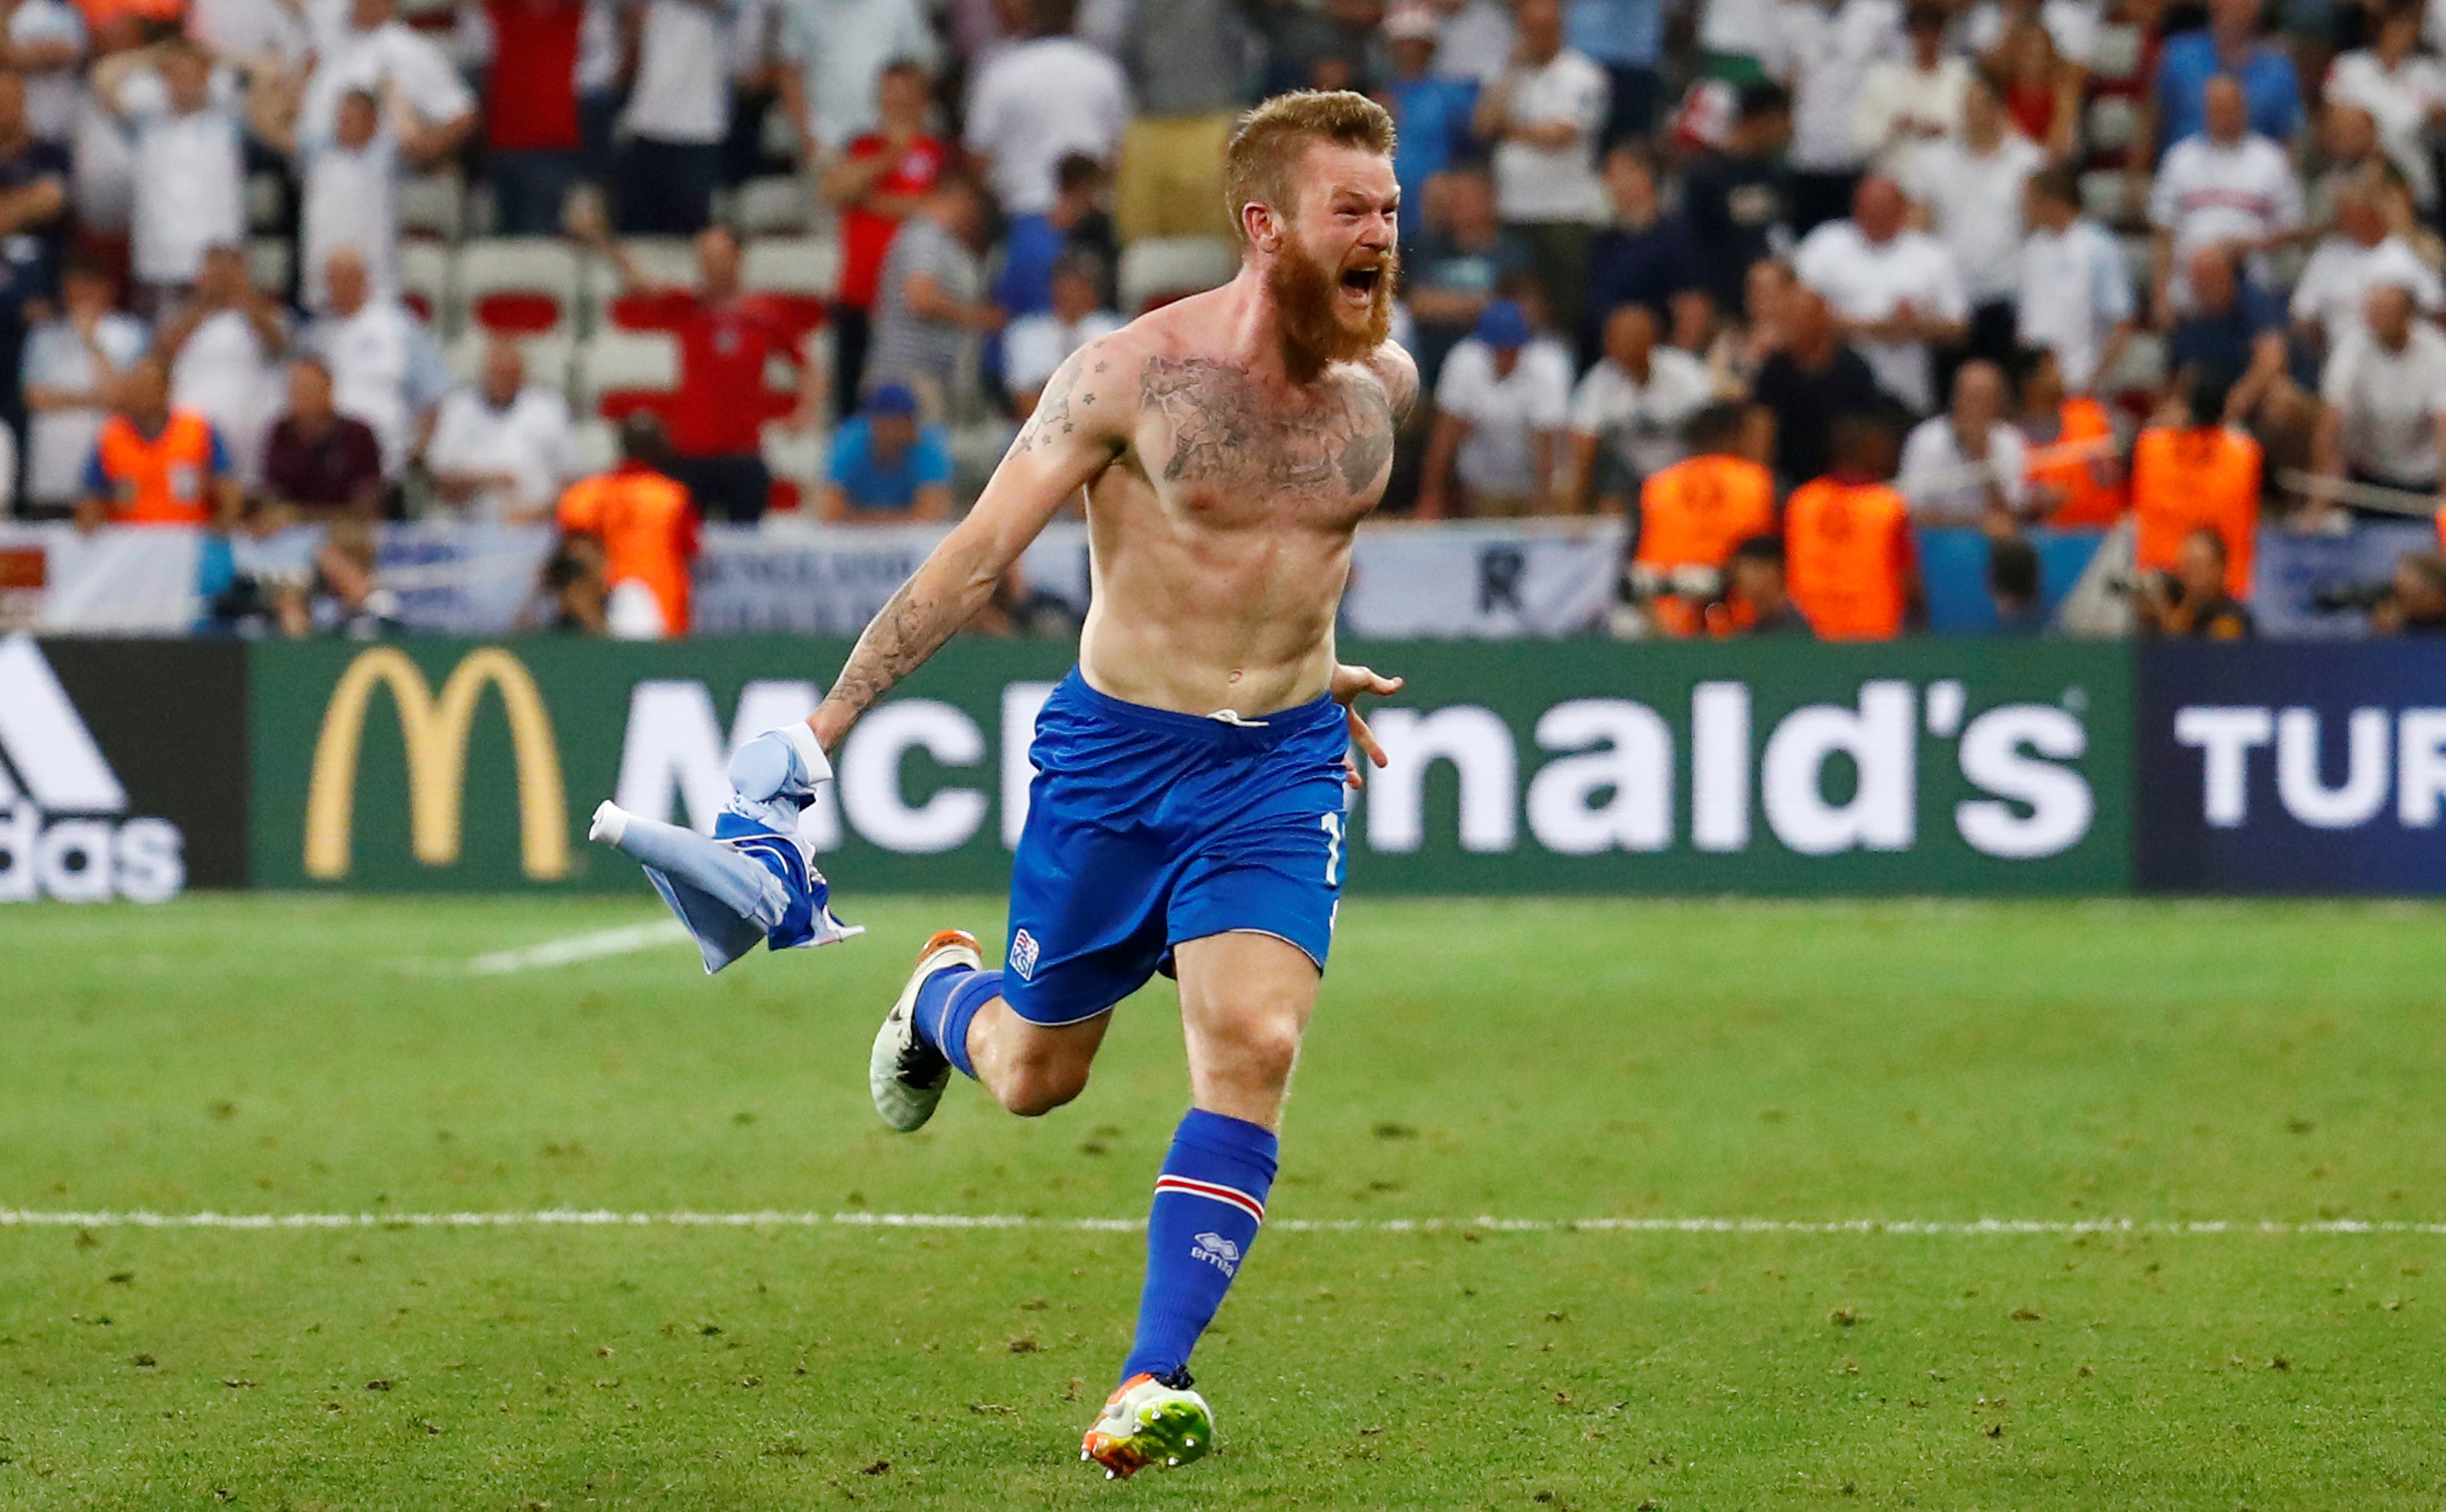 Iceland's Aron Gunnarsson celebrates after Iceland defeat England 2-1 in the Stade de Nice, Nice, France, at the Euro 2016 soccer tournament on June 27, 2016 (Reuters Staff—REUTERS)